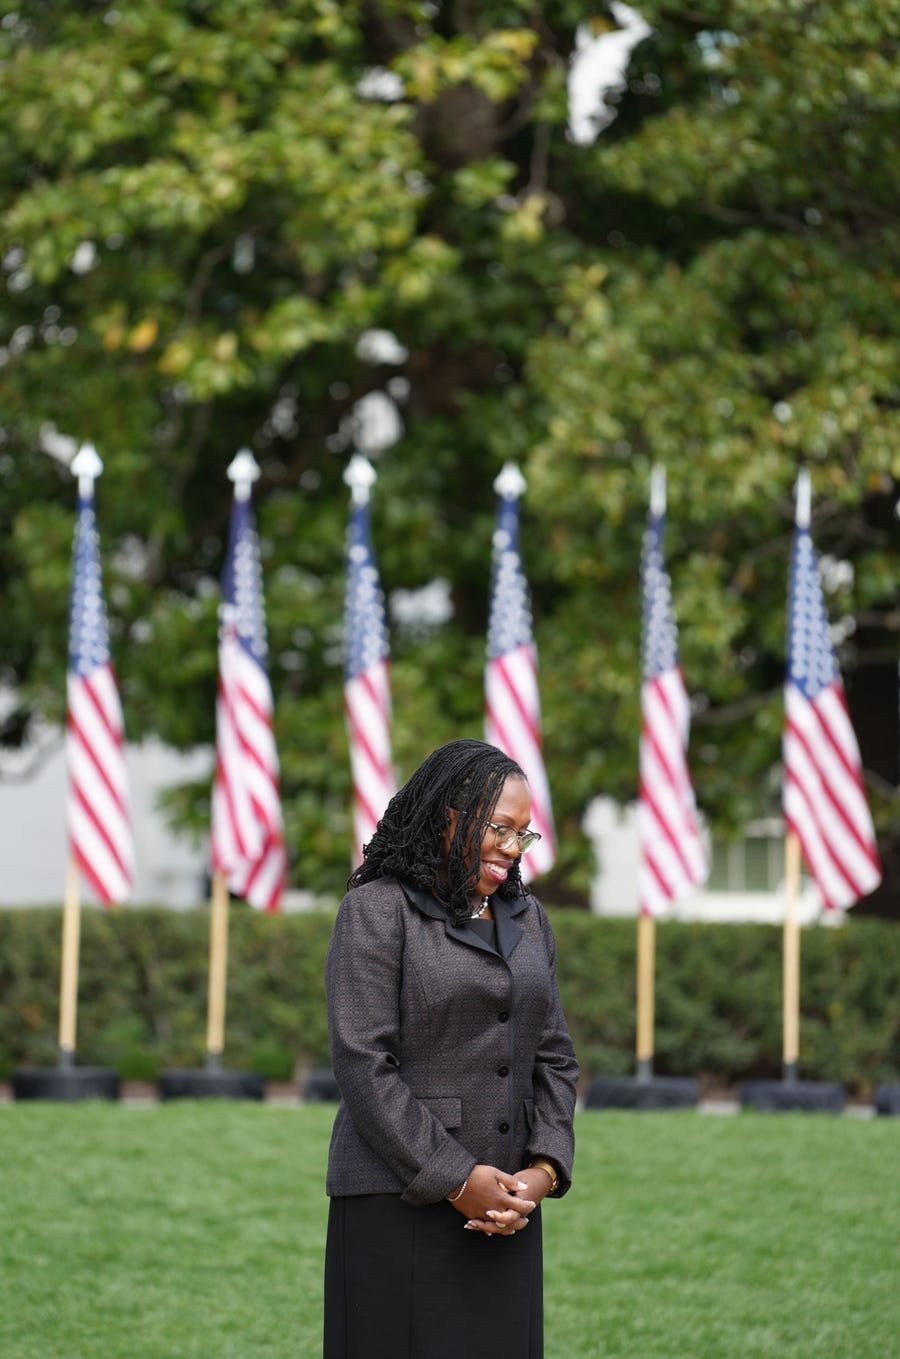 Apr 8, 2022; Washington, DC, USA; Judge Ketanji Brown smiles during an event on the South Lawn of the White House to celebrate her confirmation as the first Black woman to reach the Supreme Court.. Mandatory Credit: Megan Smith-USA TODAY